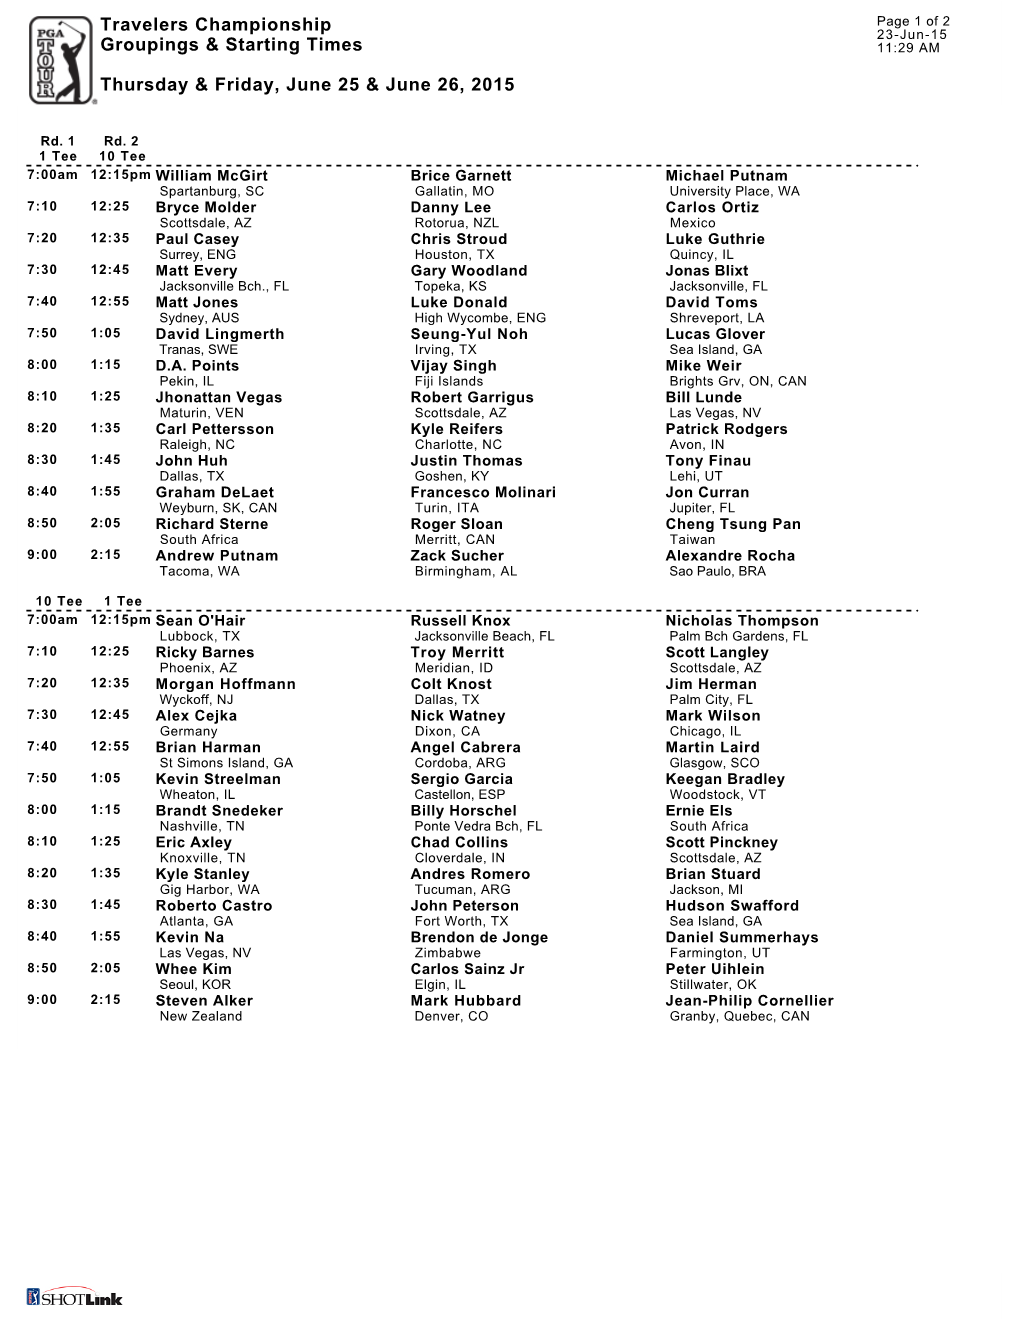 Travelers Championship Groupings & Starting Times Thursday & Friday